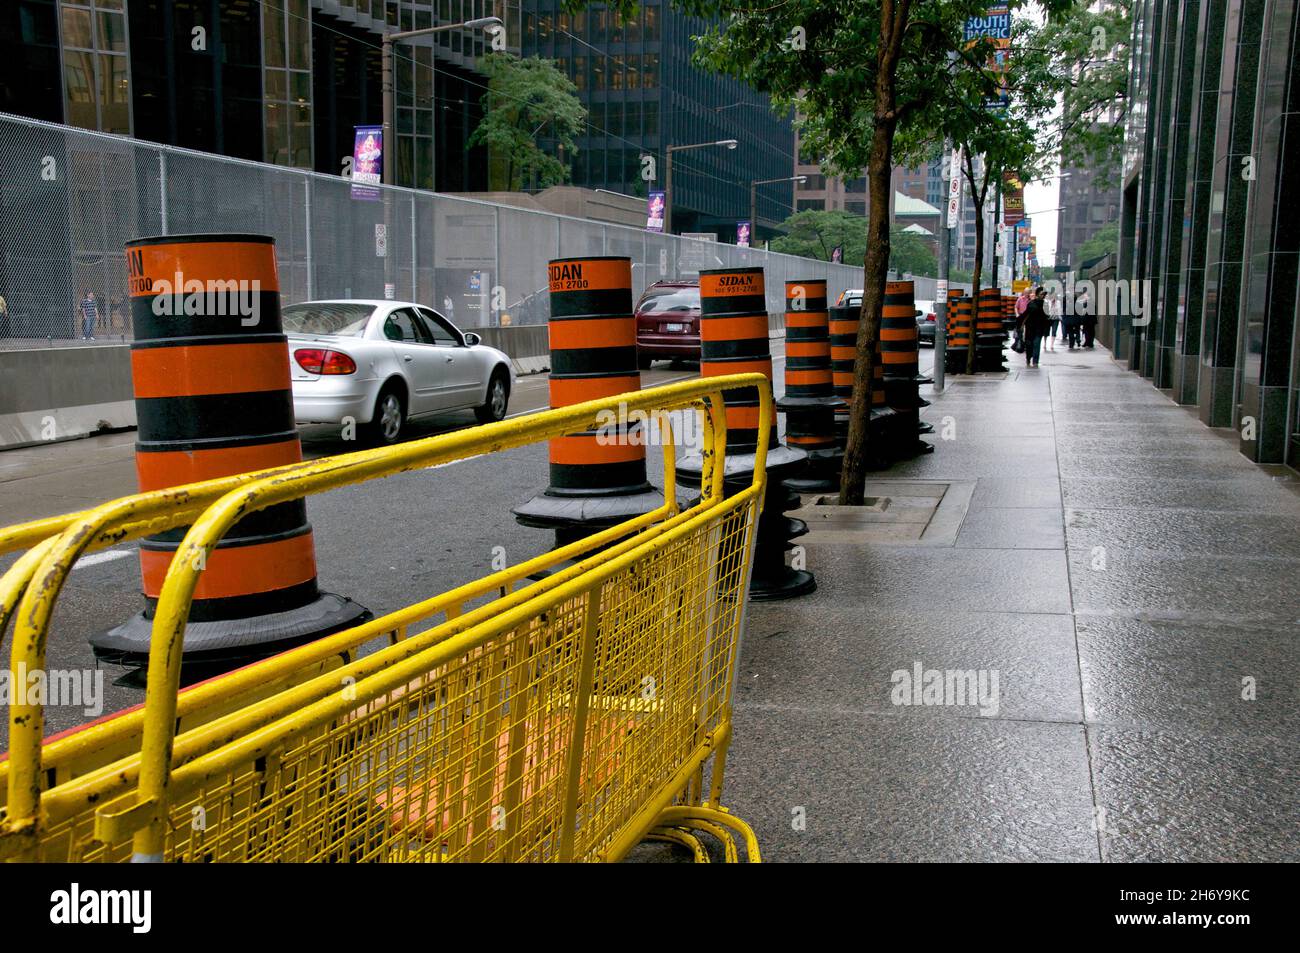 Toronto, Ontario, Canada - 06/22/2010: Crowd control barriers use as part of crown management planning in G-20 Stock Photo